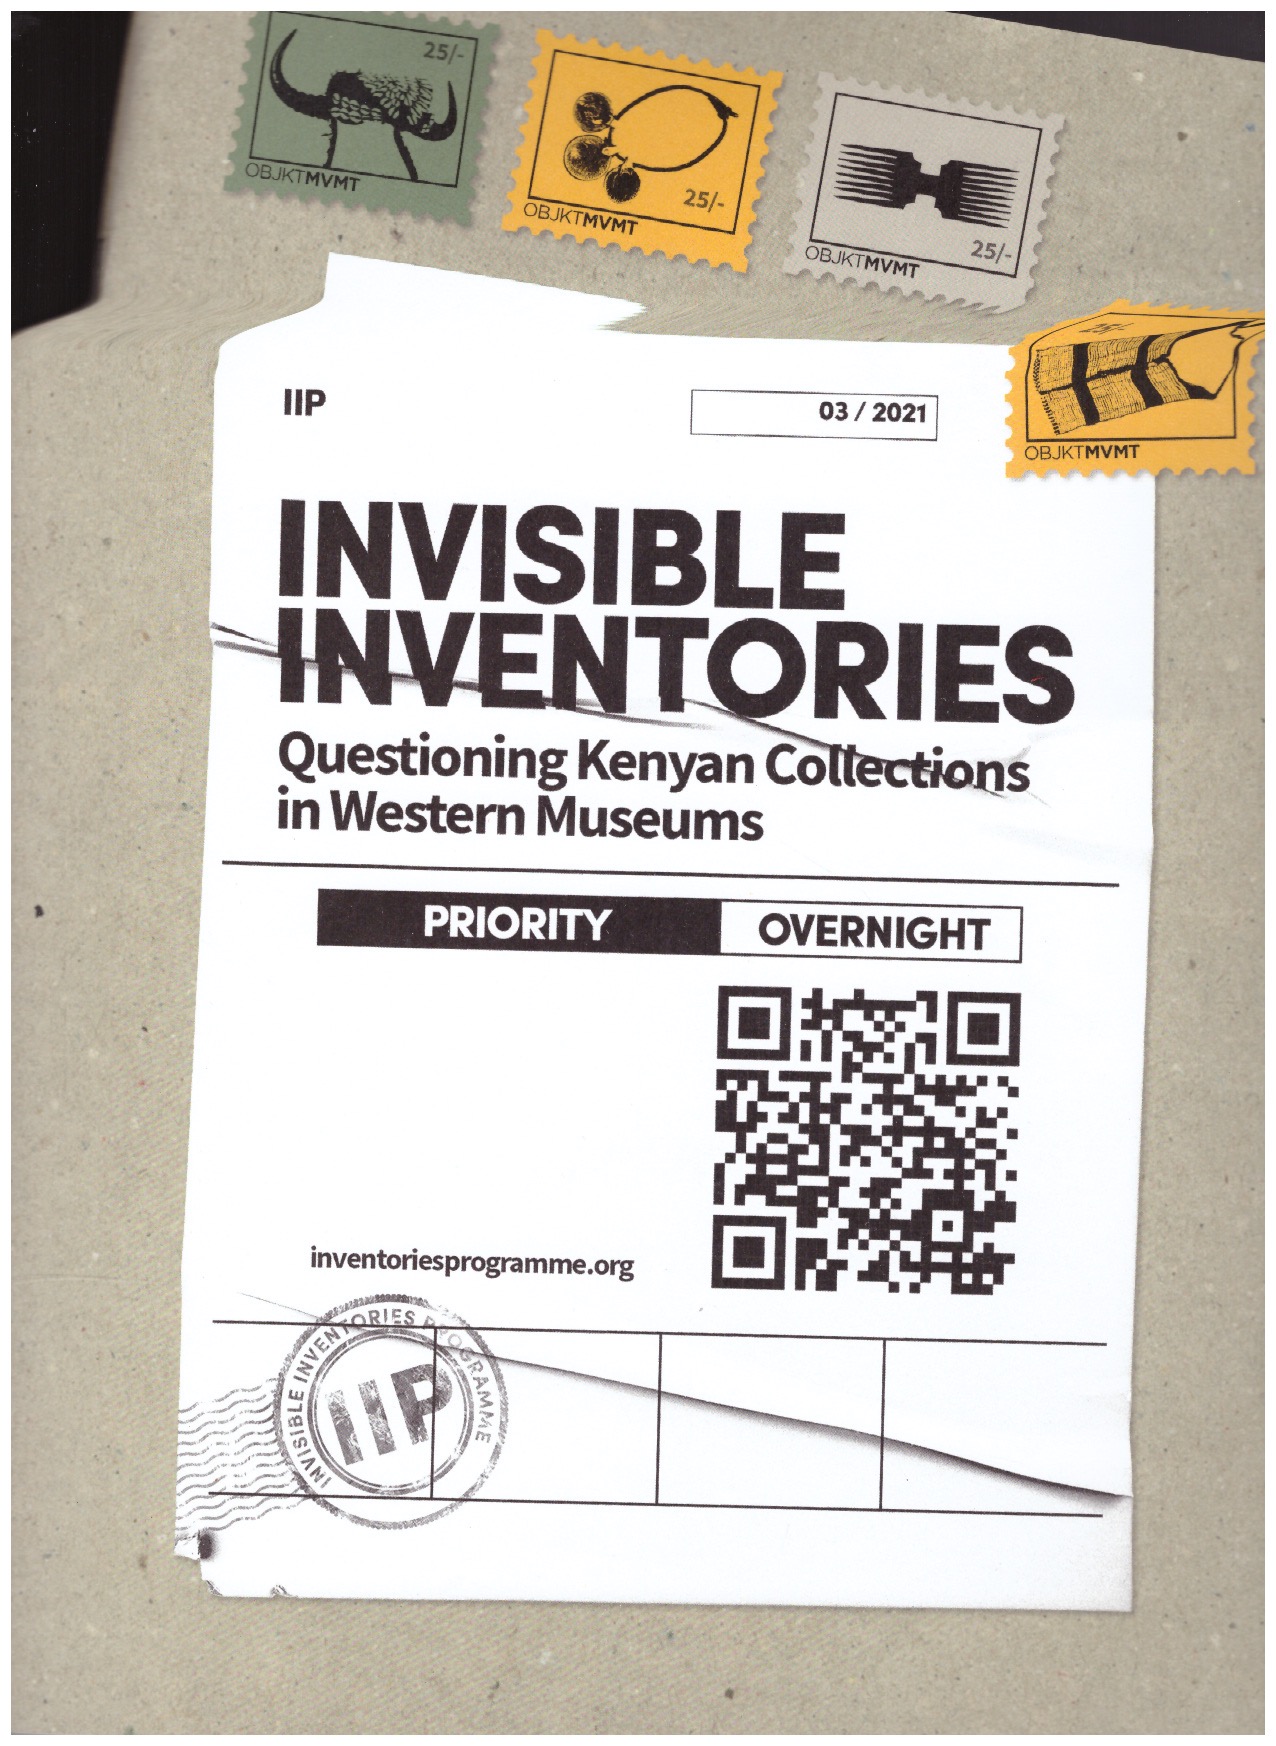 NUR GONI, Marian; HOPKINS, Sam (eds.) - Invisible Inventories [eng]